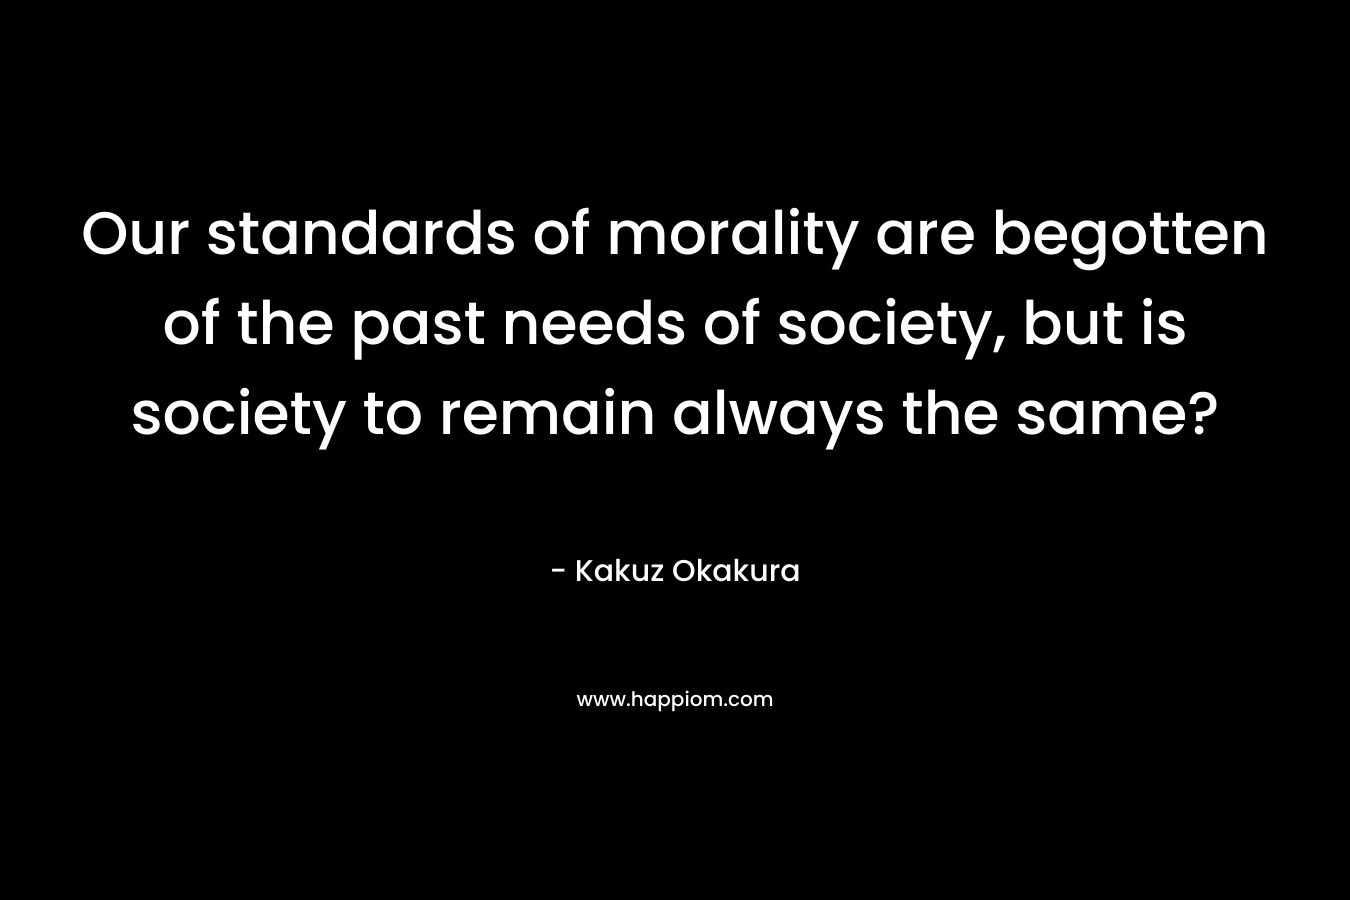 Our standards of morality are begotten of the past needs of society, but is society to remain always the same?